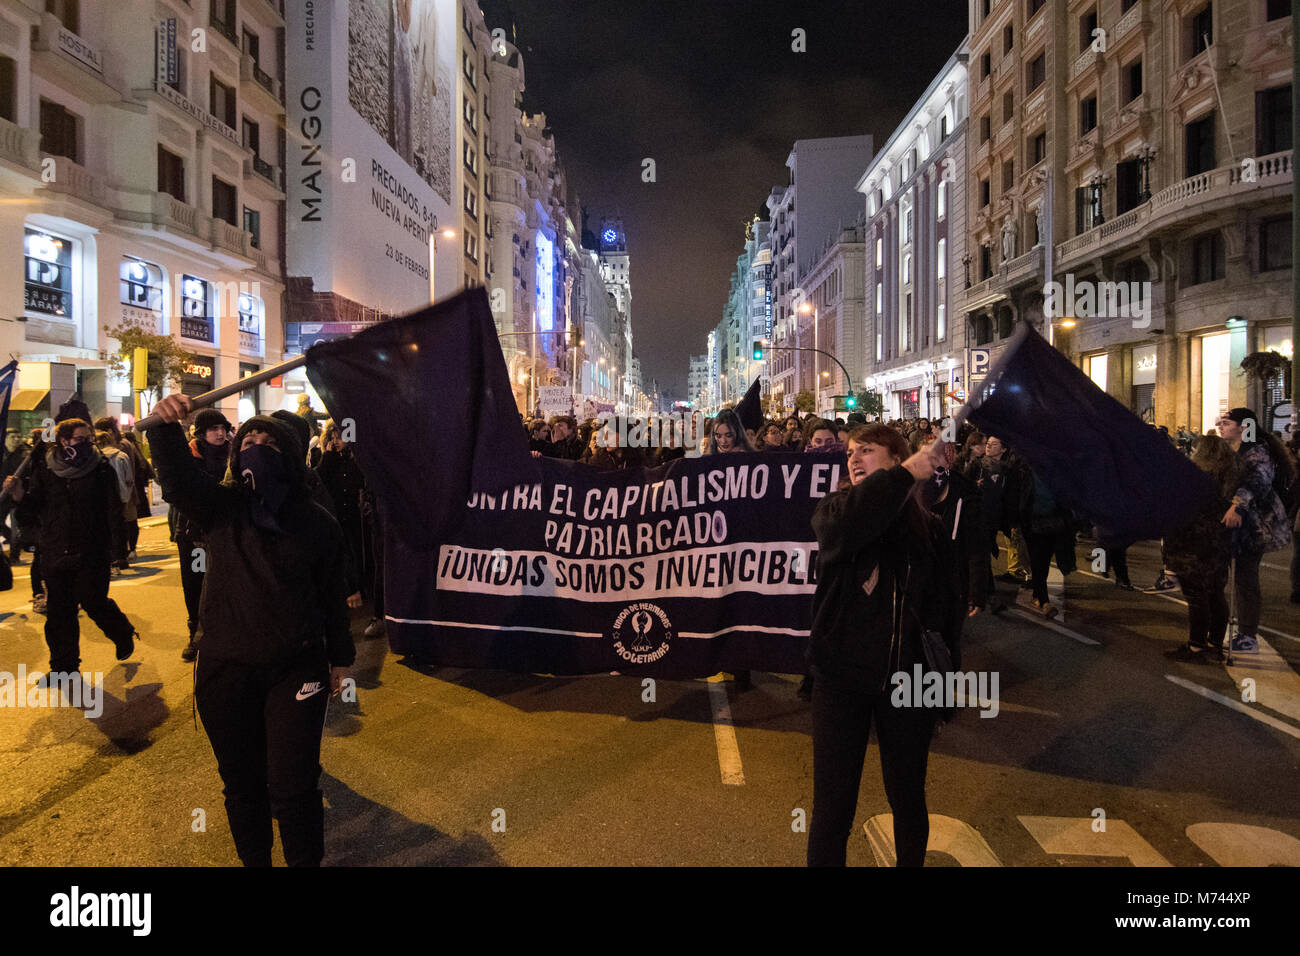 Madrid, Spain. 8th March, 2018. Banner against capitalism and patriarchy during the demonstration of the International Women's Day. © Valentin Sama-Rojo/Alamy Live News. Stock Photo